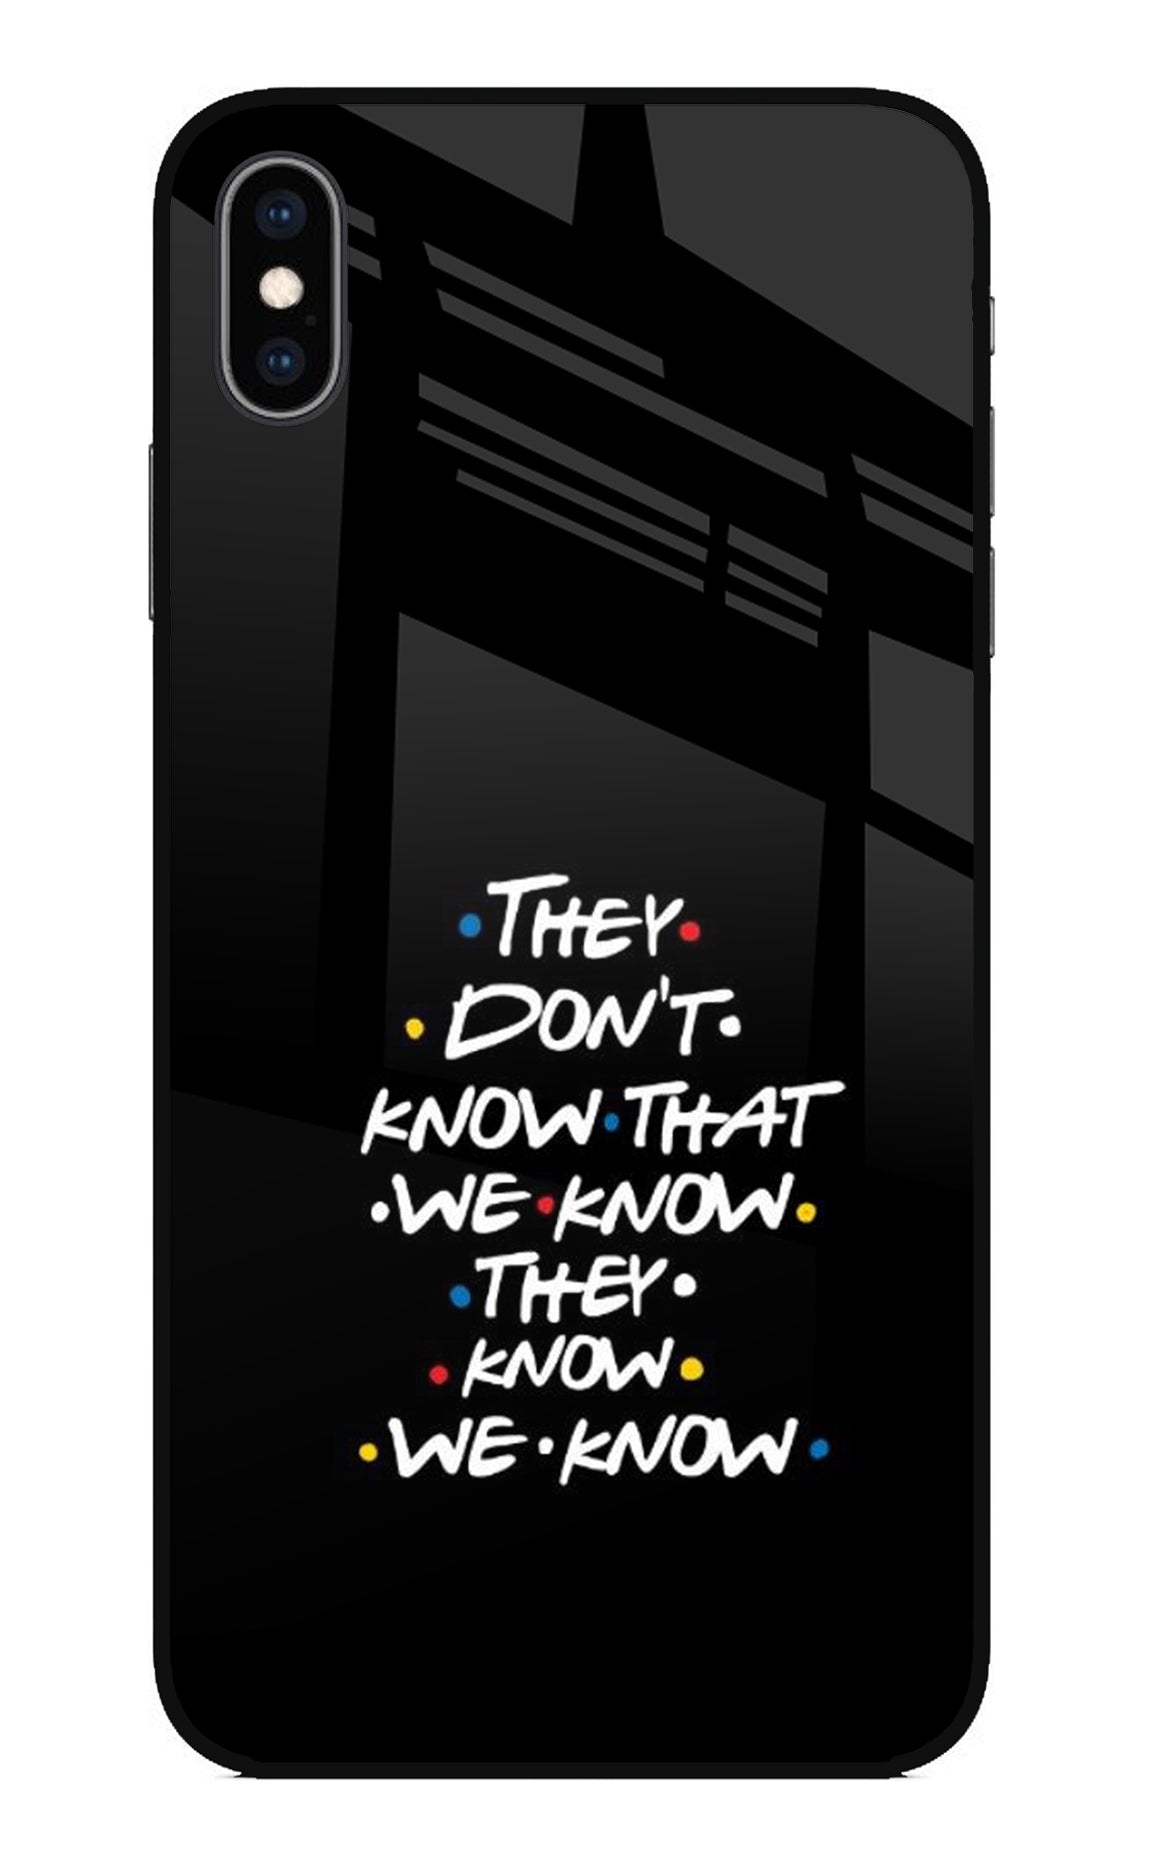 FRIENDS Dialogue iPhone XS Max Glass Case